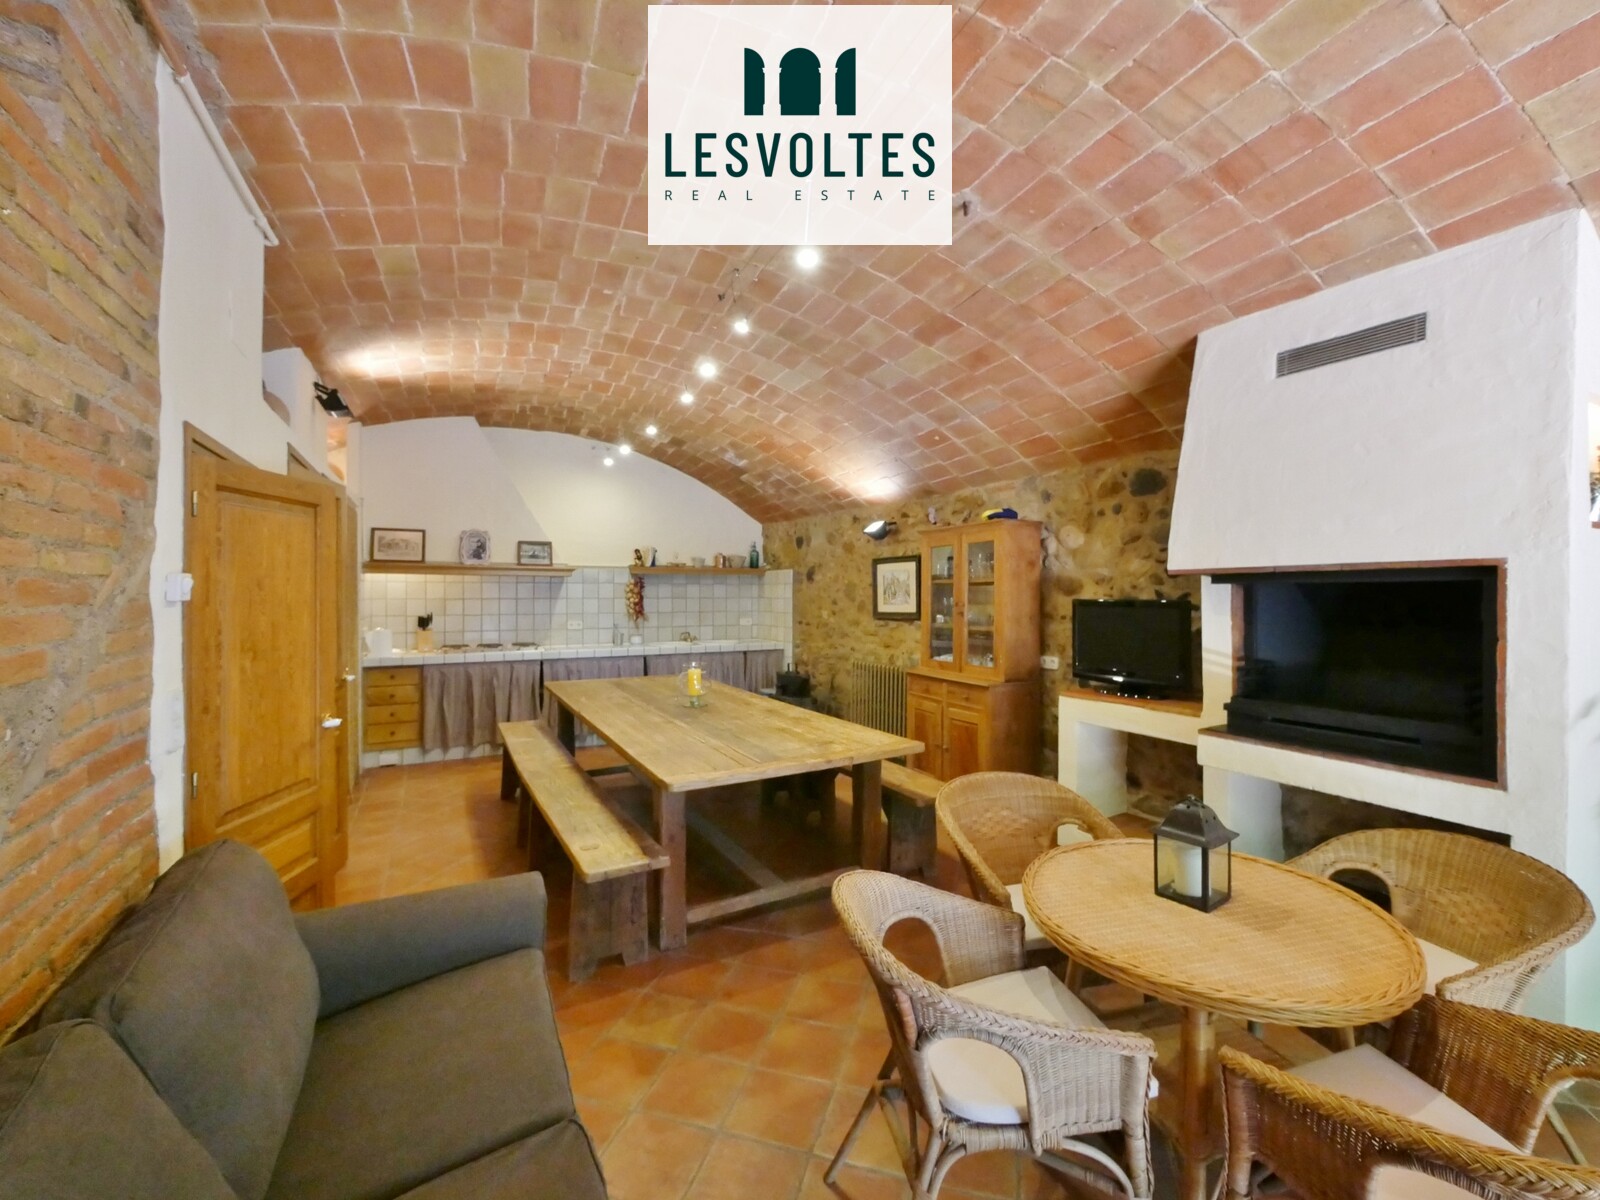 BEAUTIFUL RUSTIC SEMI-DETACHED HOUSE OF 170 M2, FOR RENT AS A SECOND HOME, IN THE OLD TOWN OF CORÇÀ.